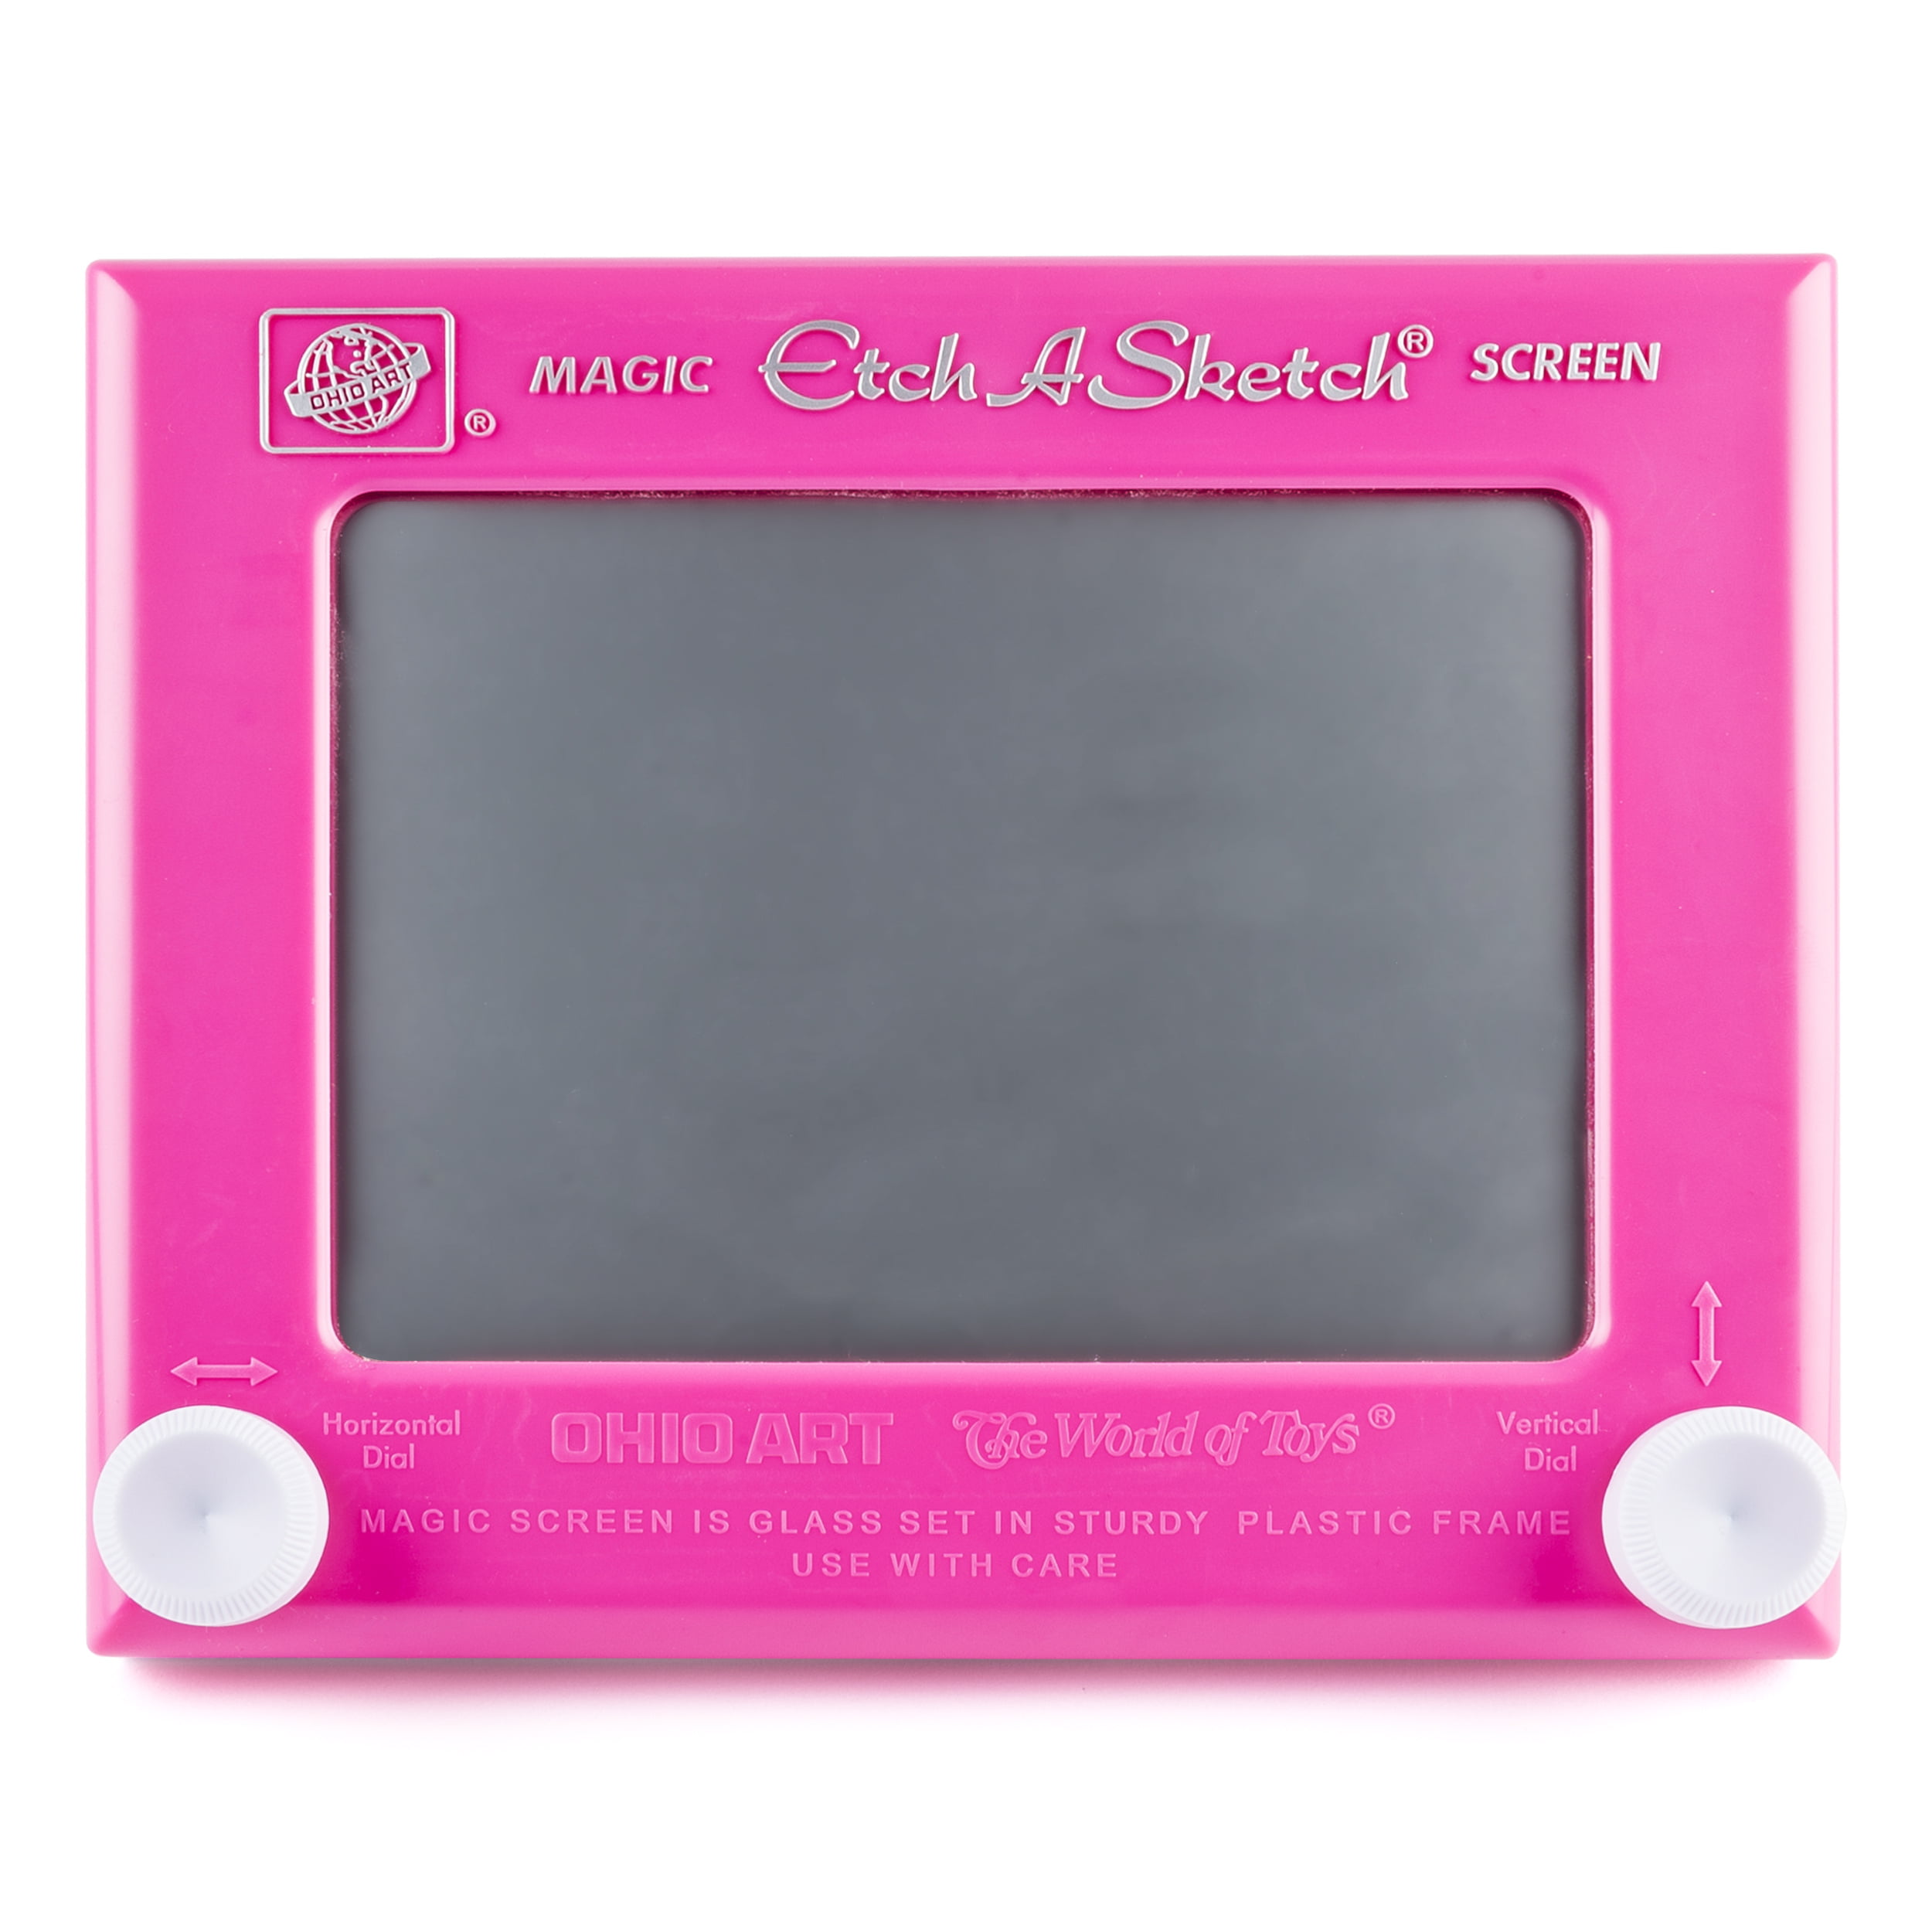 Ohio Art Travel Hot Pocket Etch A Sketch Pink Creative Magic Screen Draw  Toy NEW